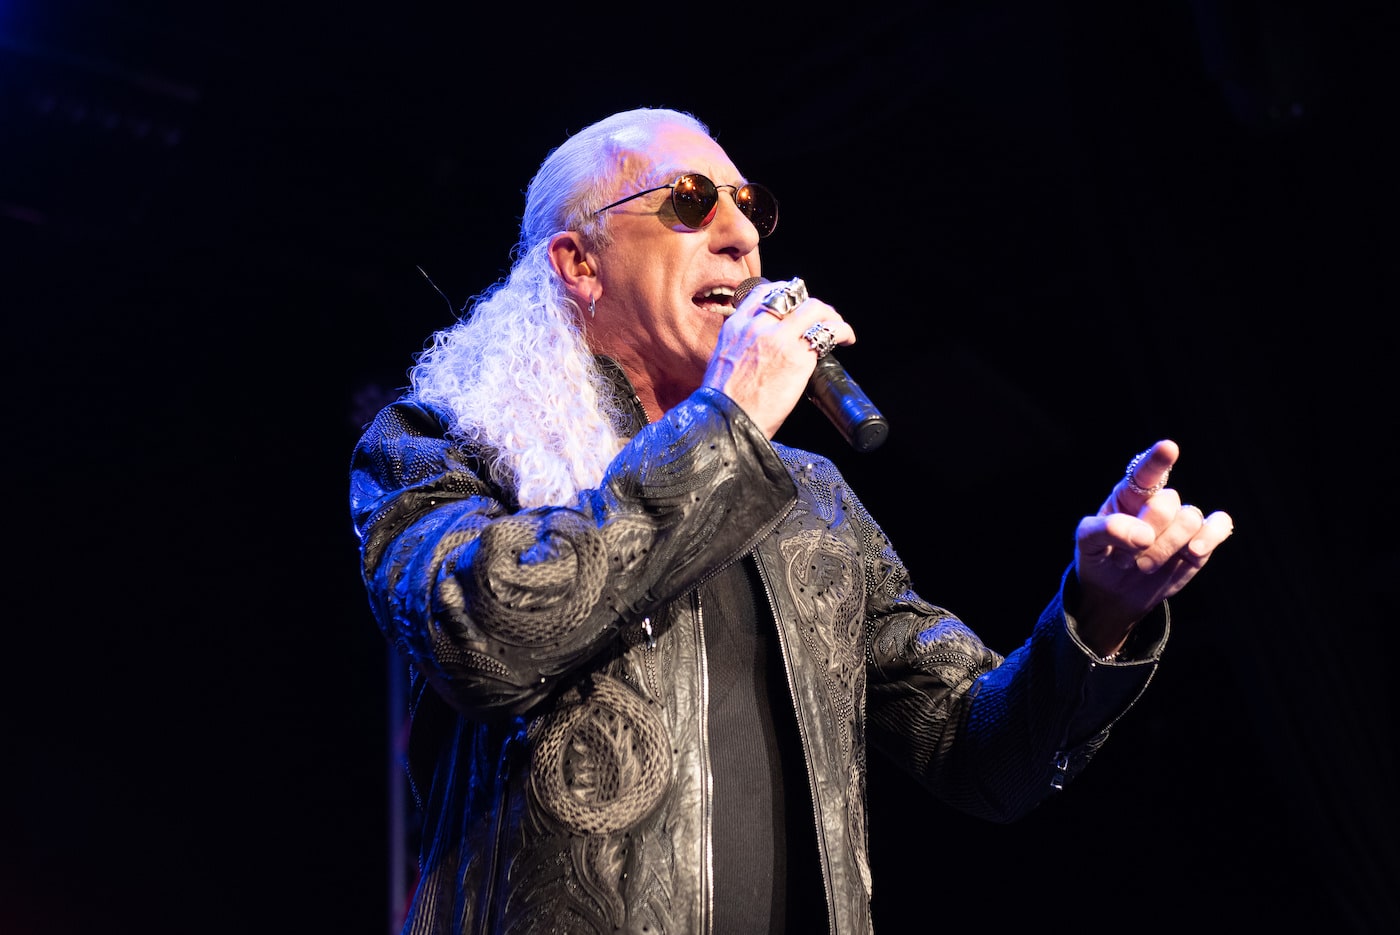 Dee Snider Says Performing on ‘The Masked Singer’ Is a ‘Sensory Deprivation Experience’ and ‘Disorienting’